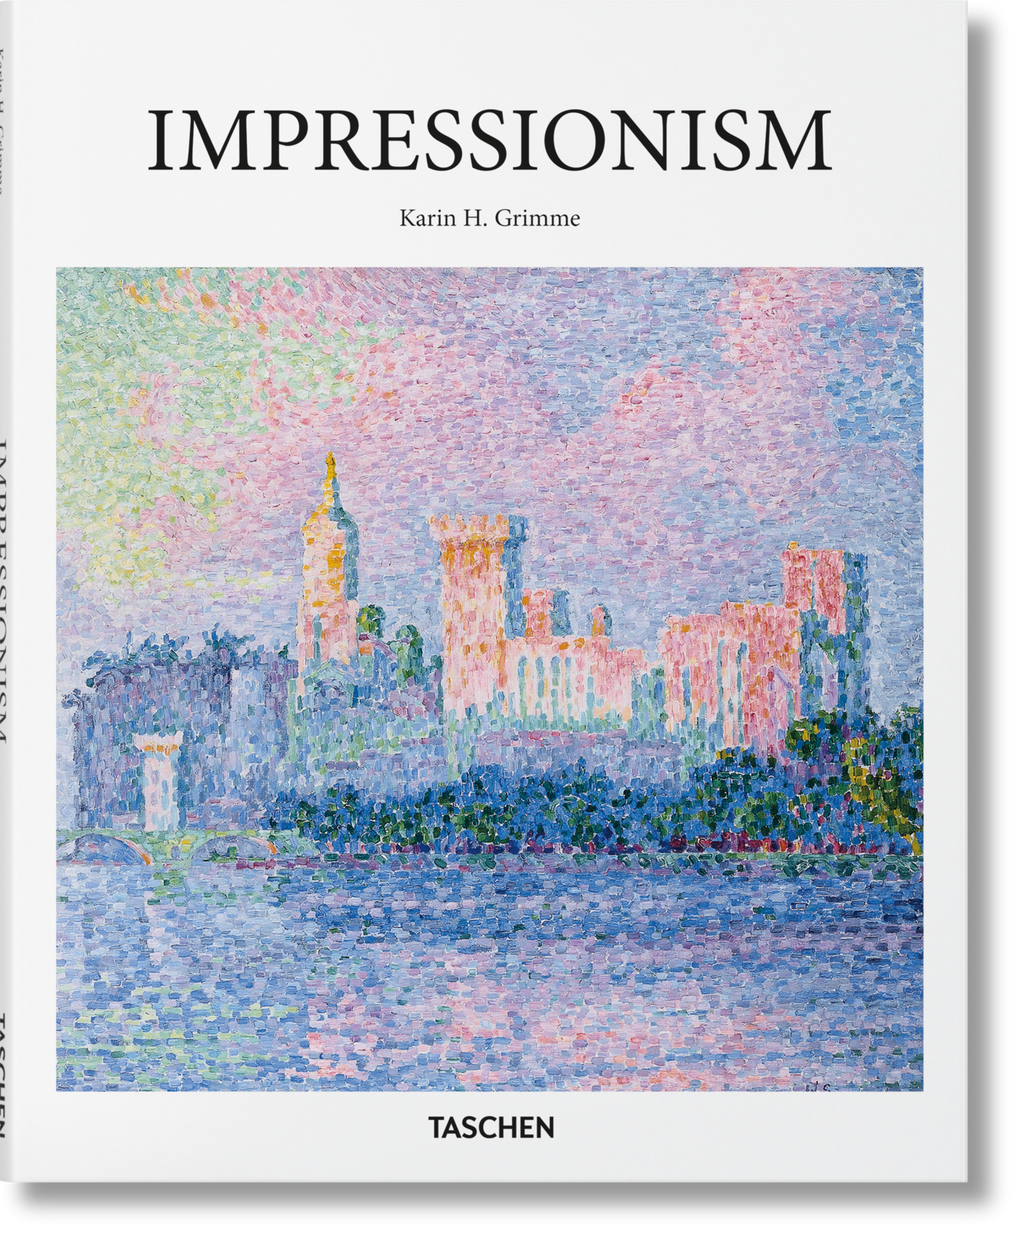 Impressionism by Karin H. Grimme